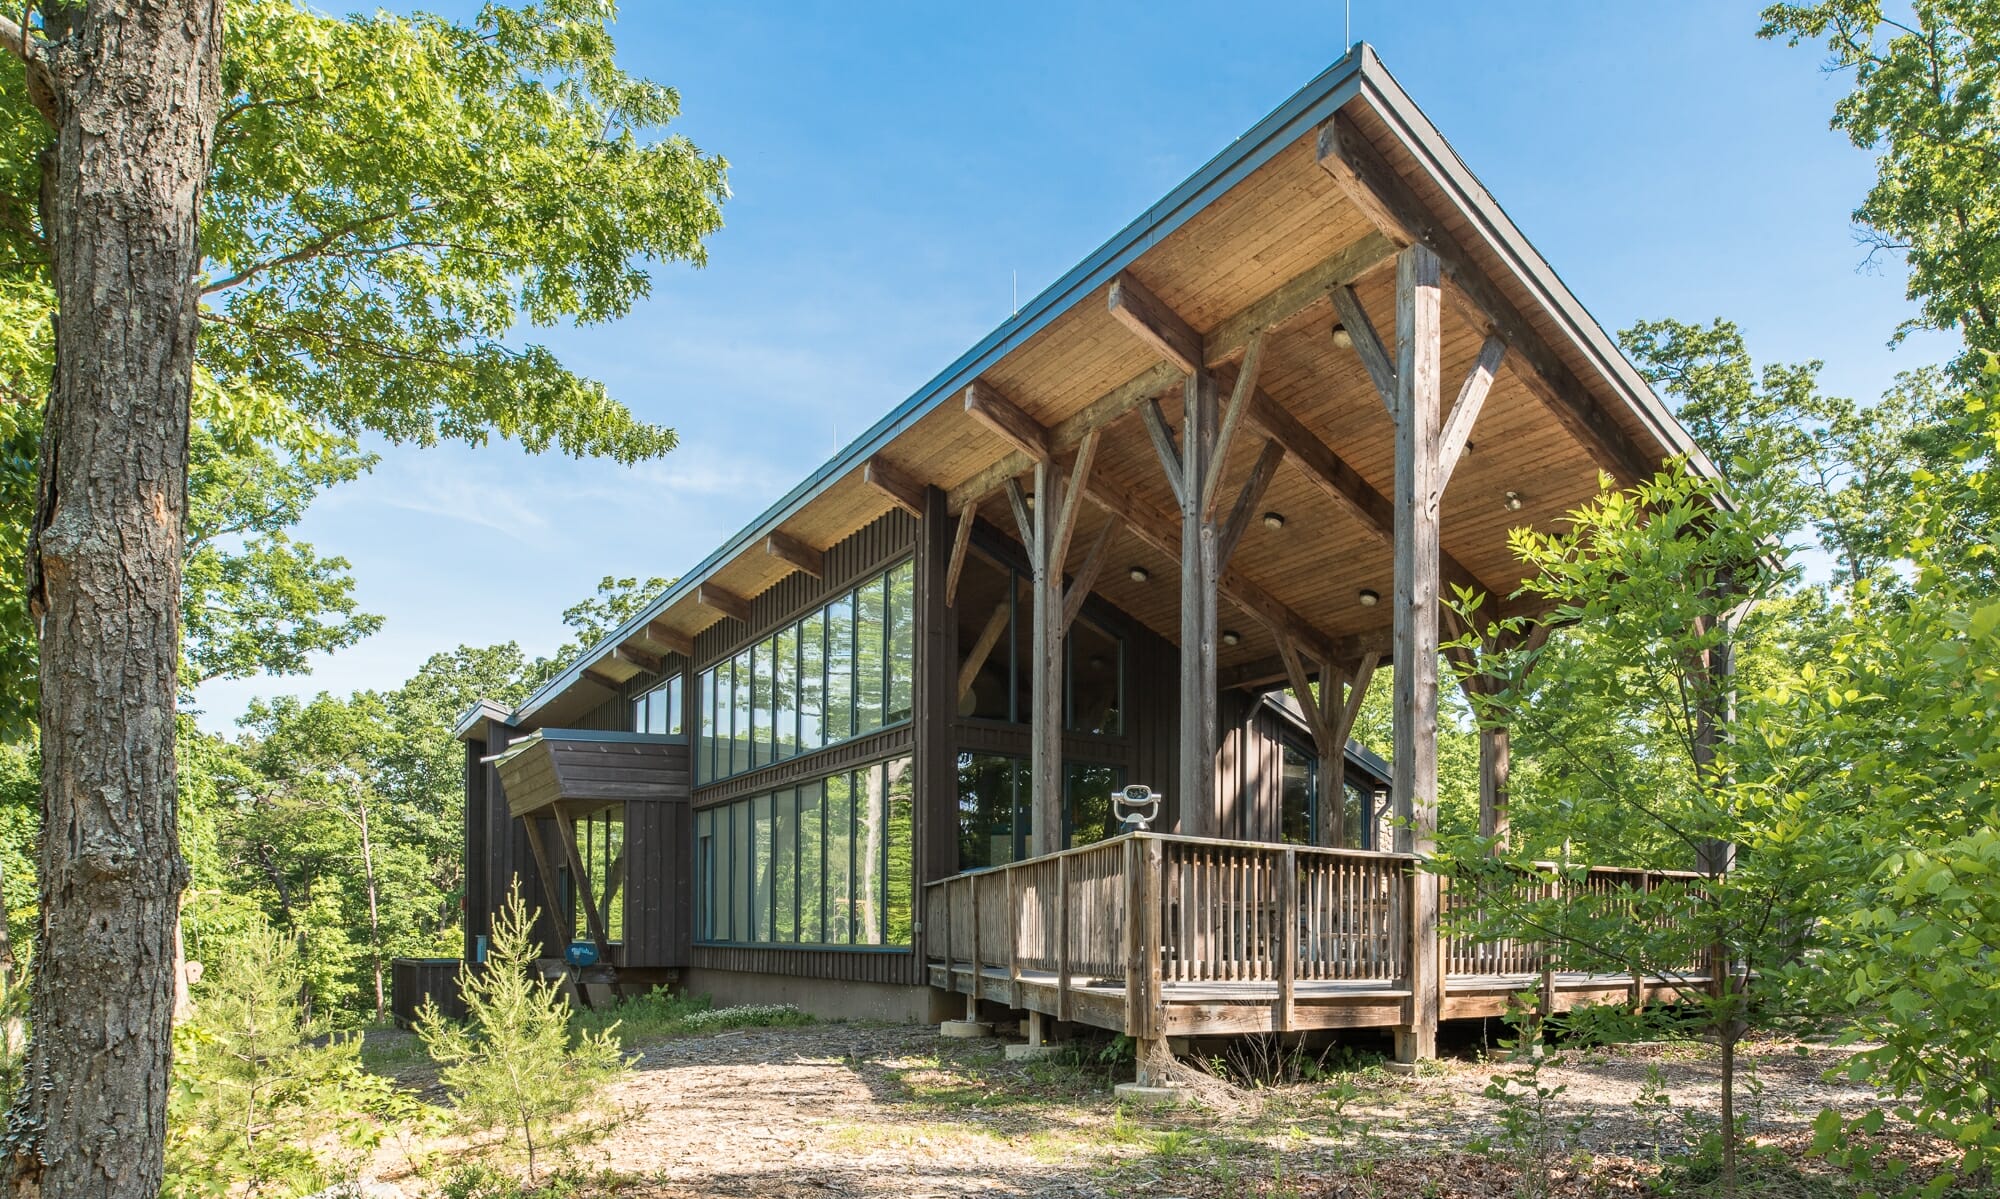 Shenandoah State Park Visitors Center built with Native Hemlock Timber with Traditional and Steel Joinery.